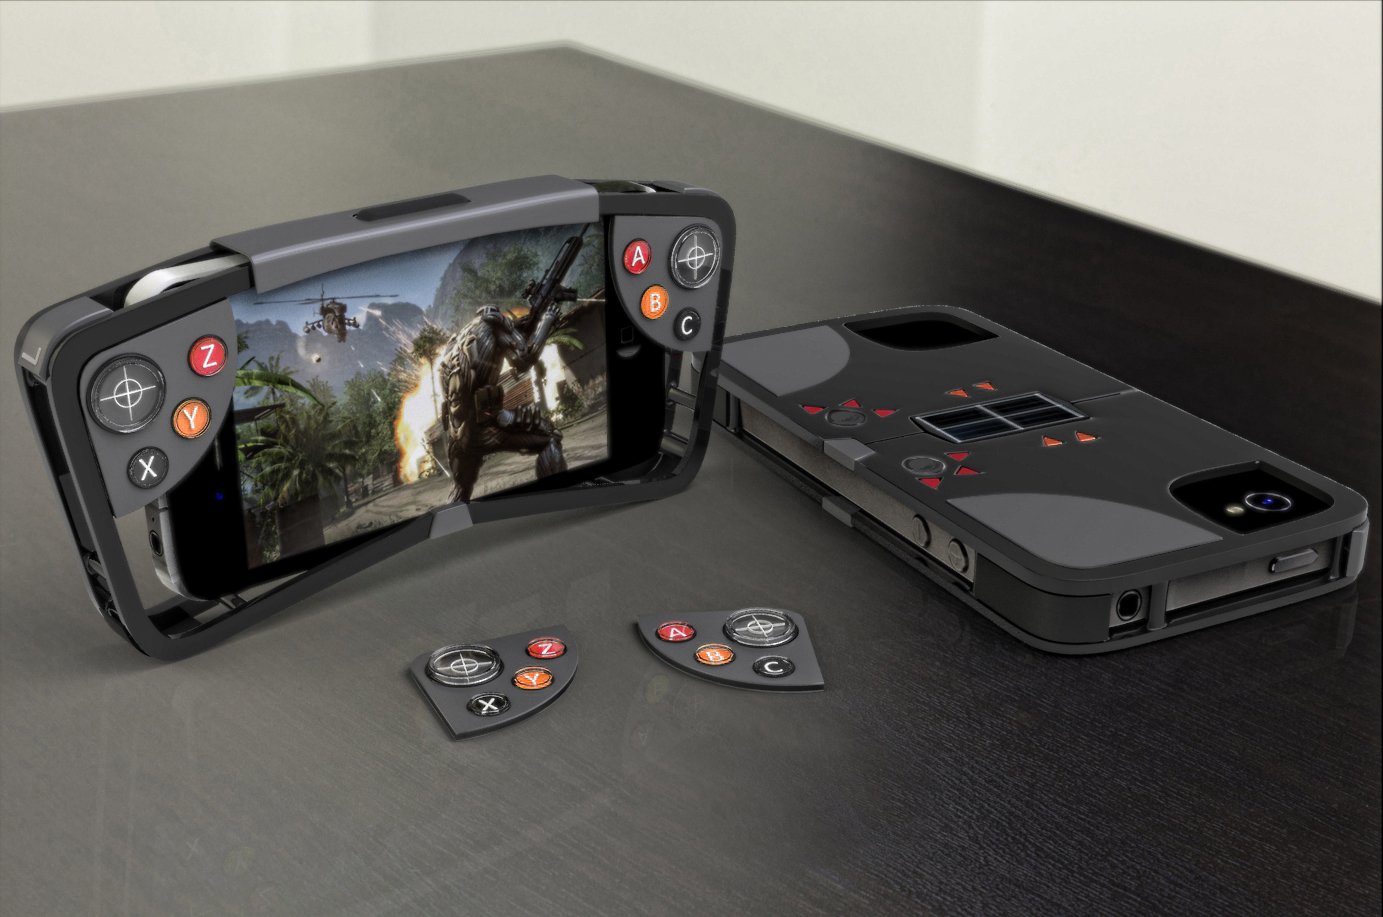 FlipSide gaming case arrives on Kickstarter with claimed support from Apple